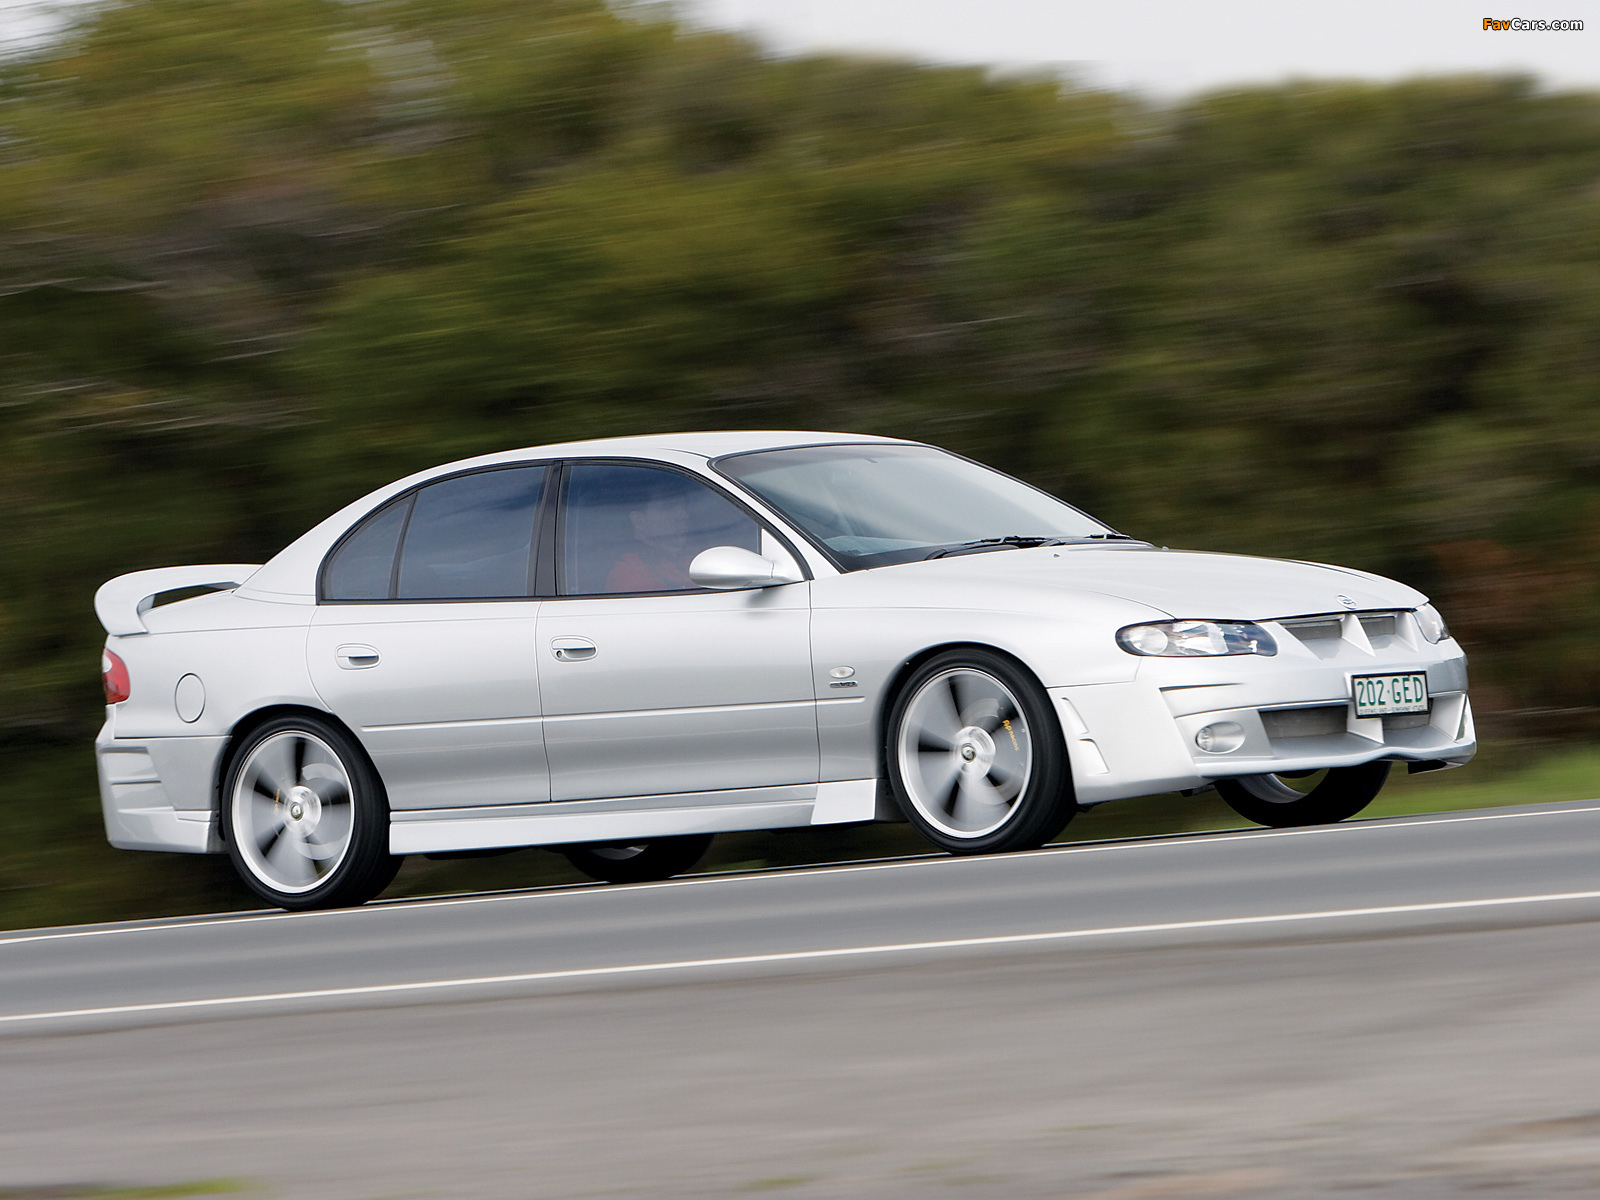 Photos of Holden Commodore (1600 x 1200)